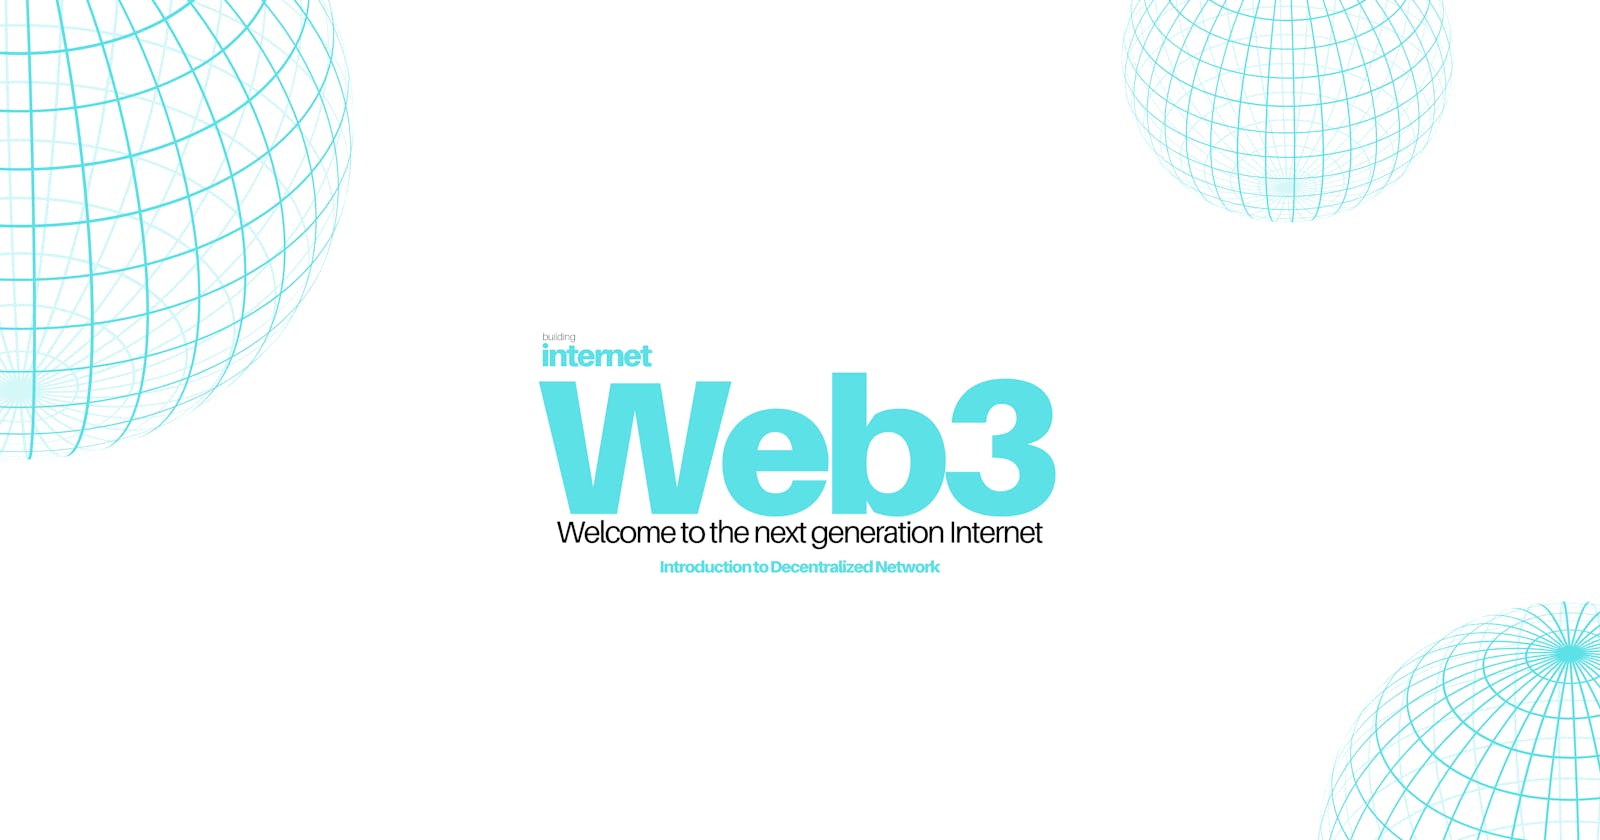 What is Web3 & Decentralized Network? Why is it important?